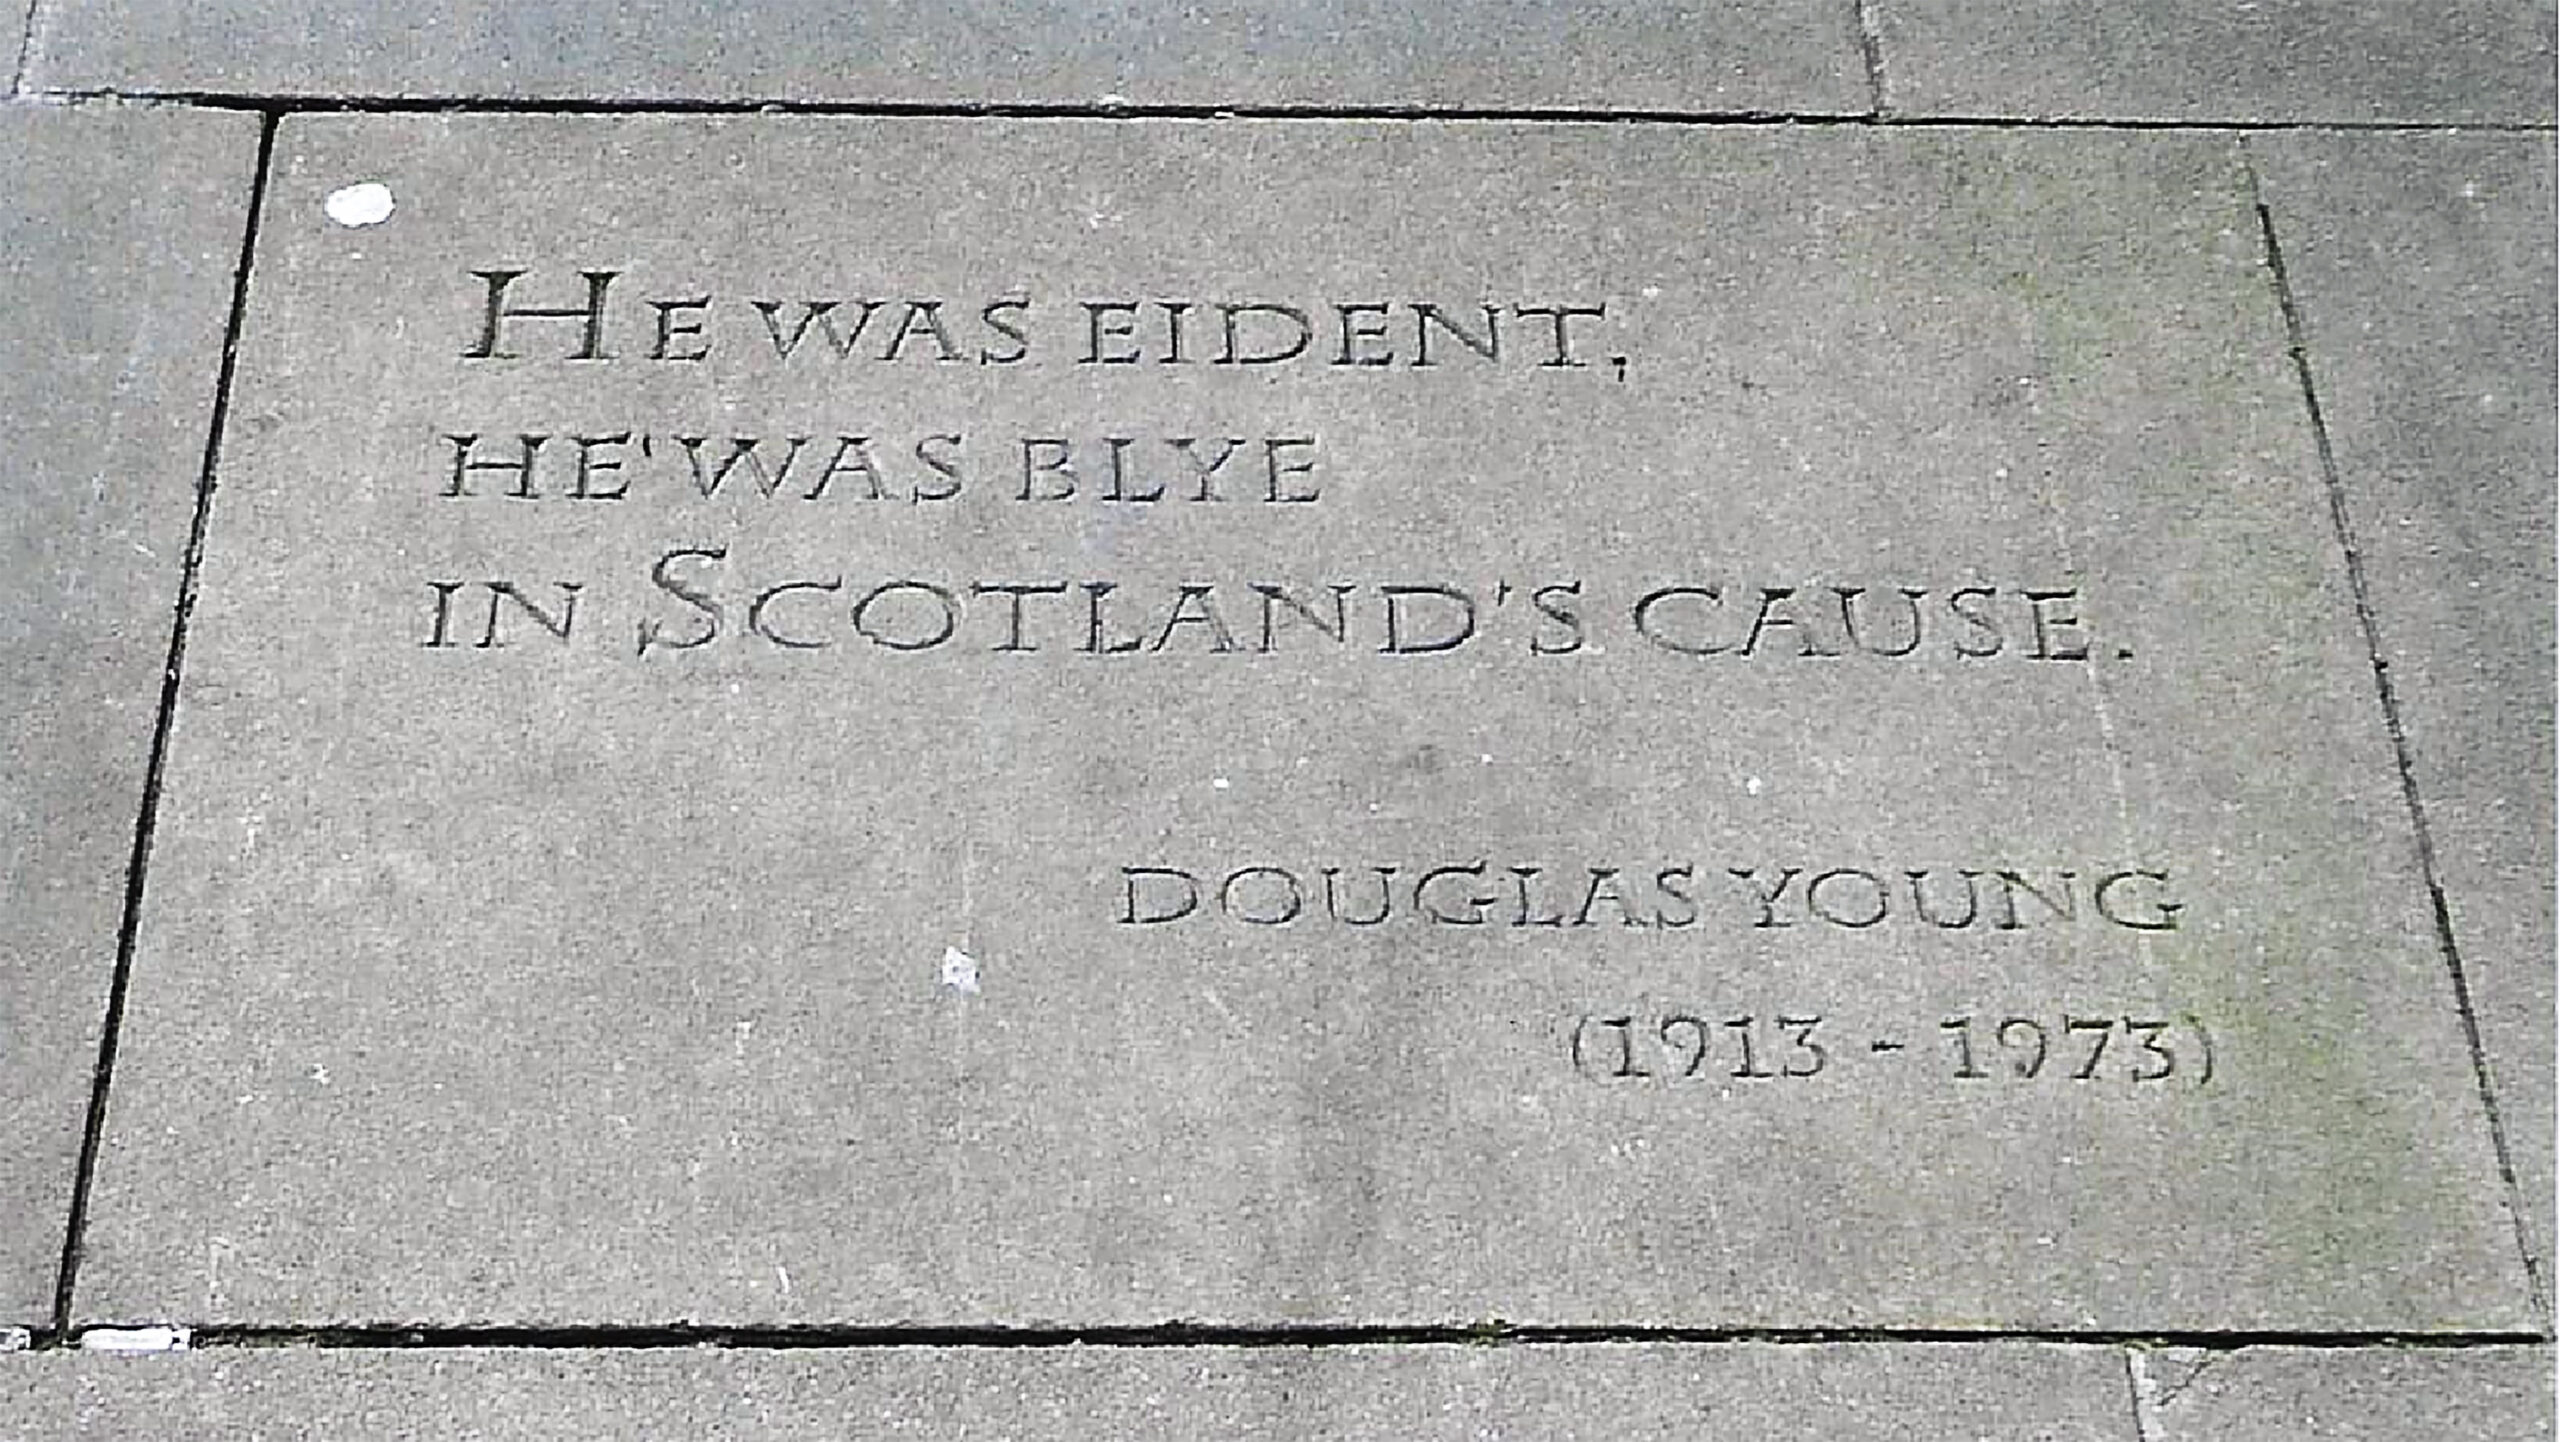 Tayport Heritage Trail - Board 11 - Memorial Slab at Makar’s Court for Douglas Young 1973